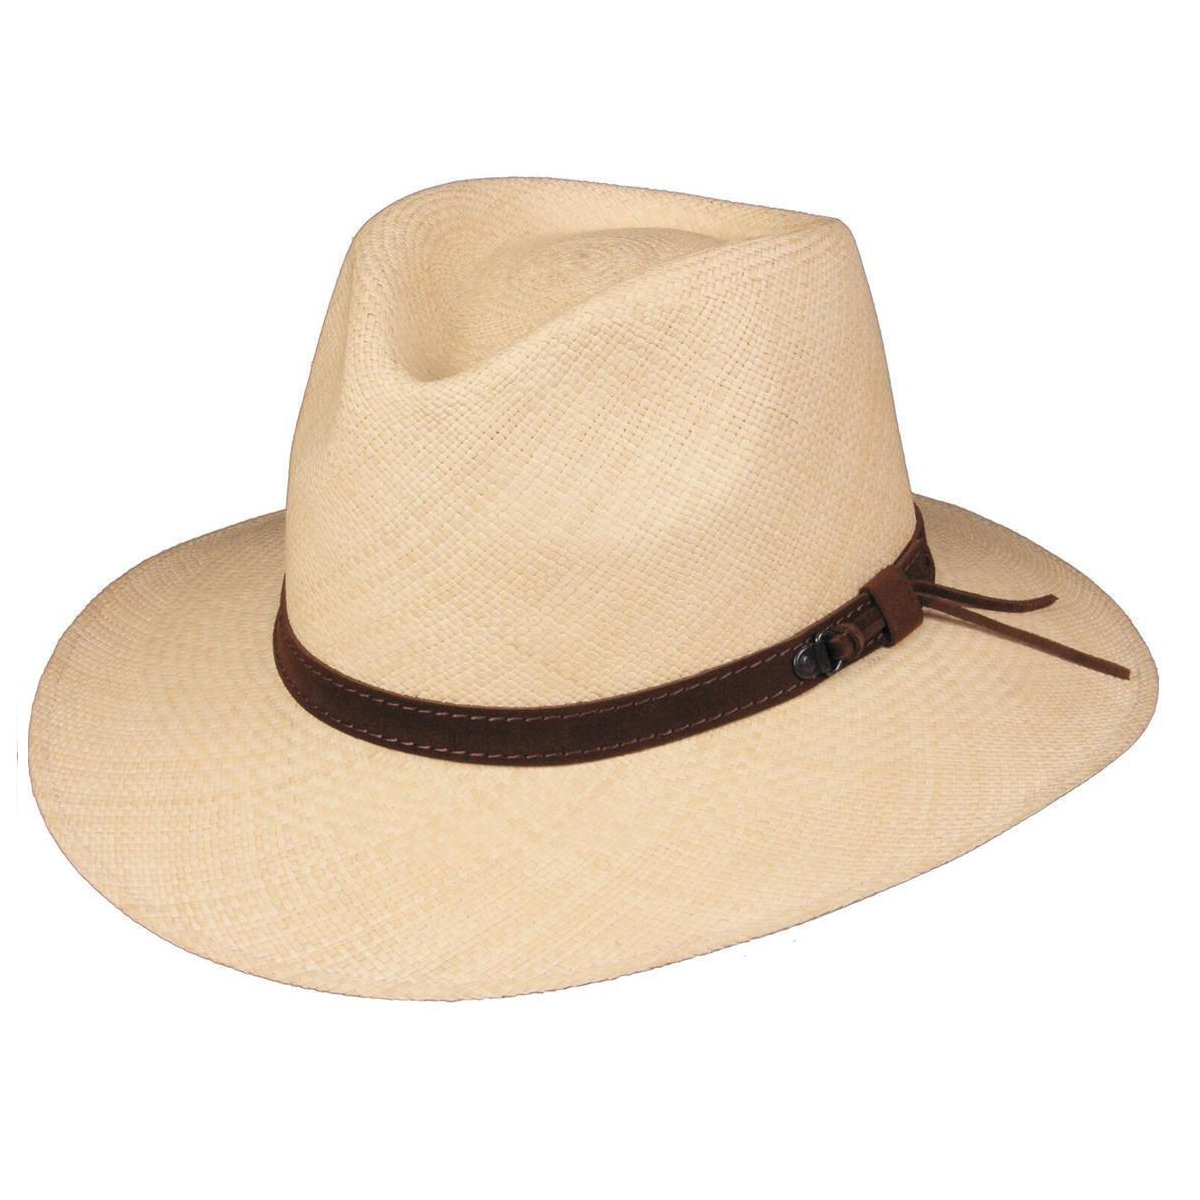 Can be rolls up for packing-Loreto Ecuador Straw Panama Hat -  Paja Toquilla [Fast shipping and box packing]